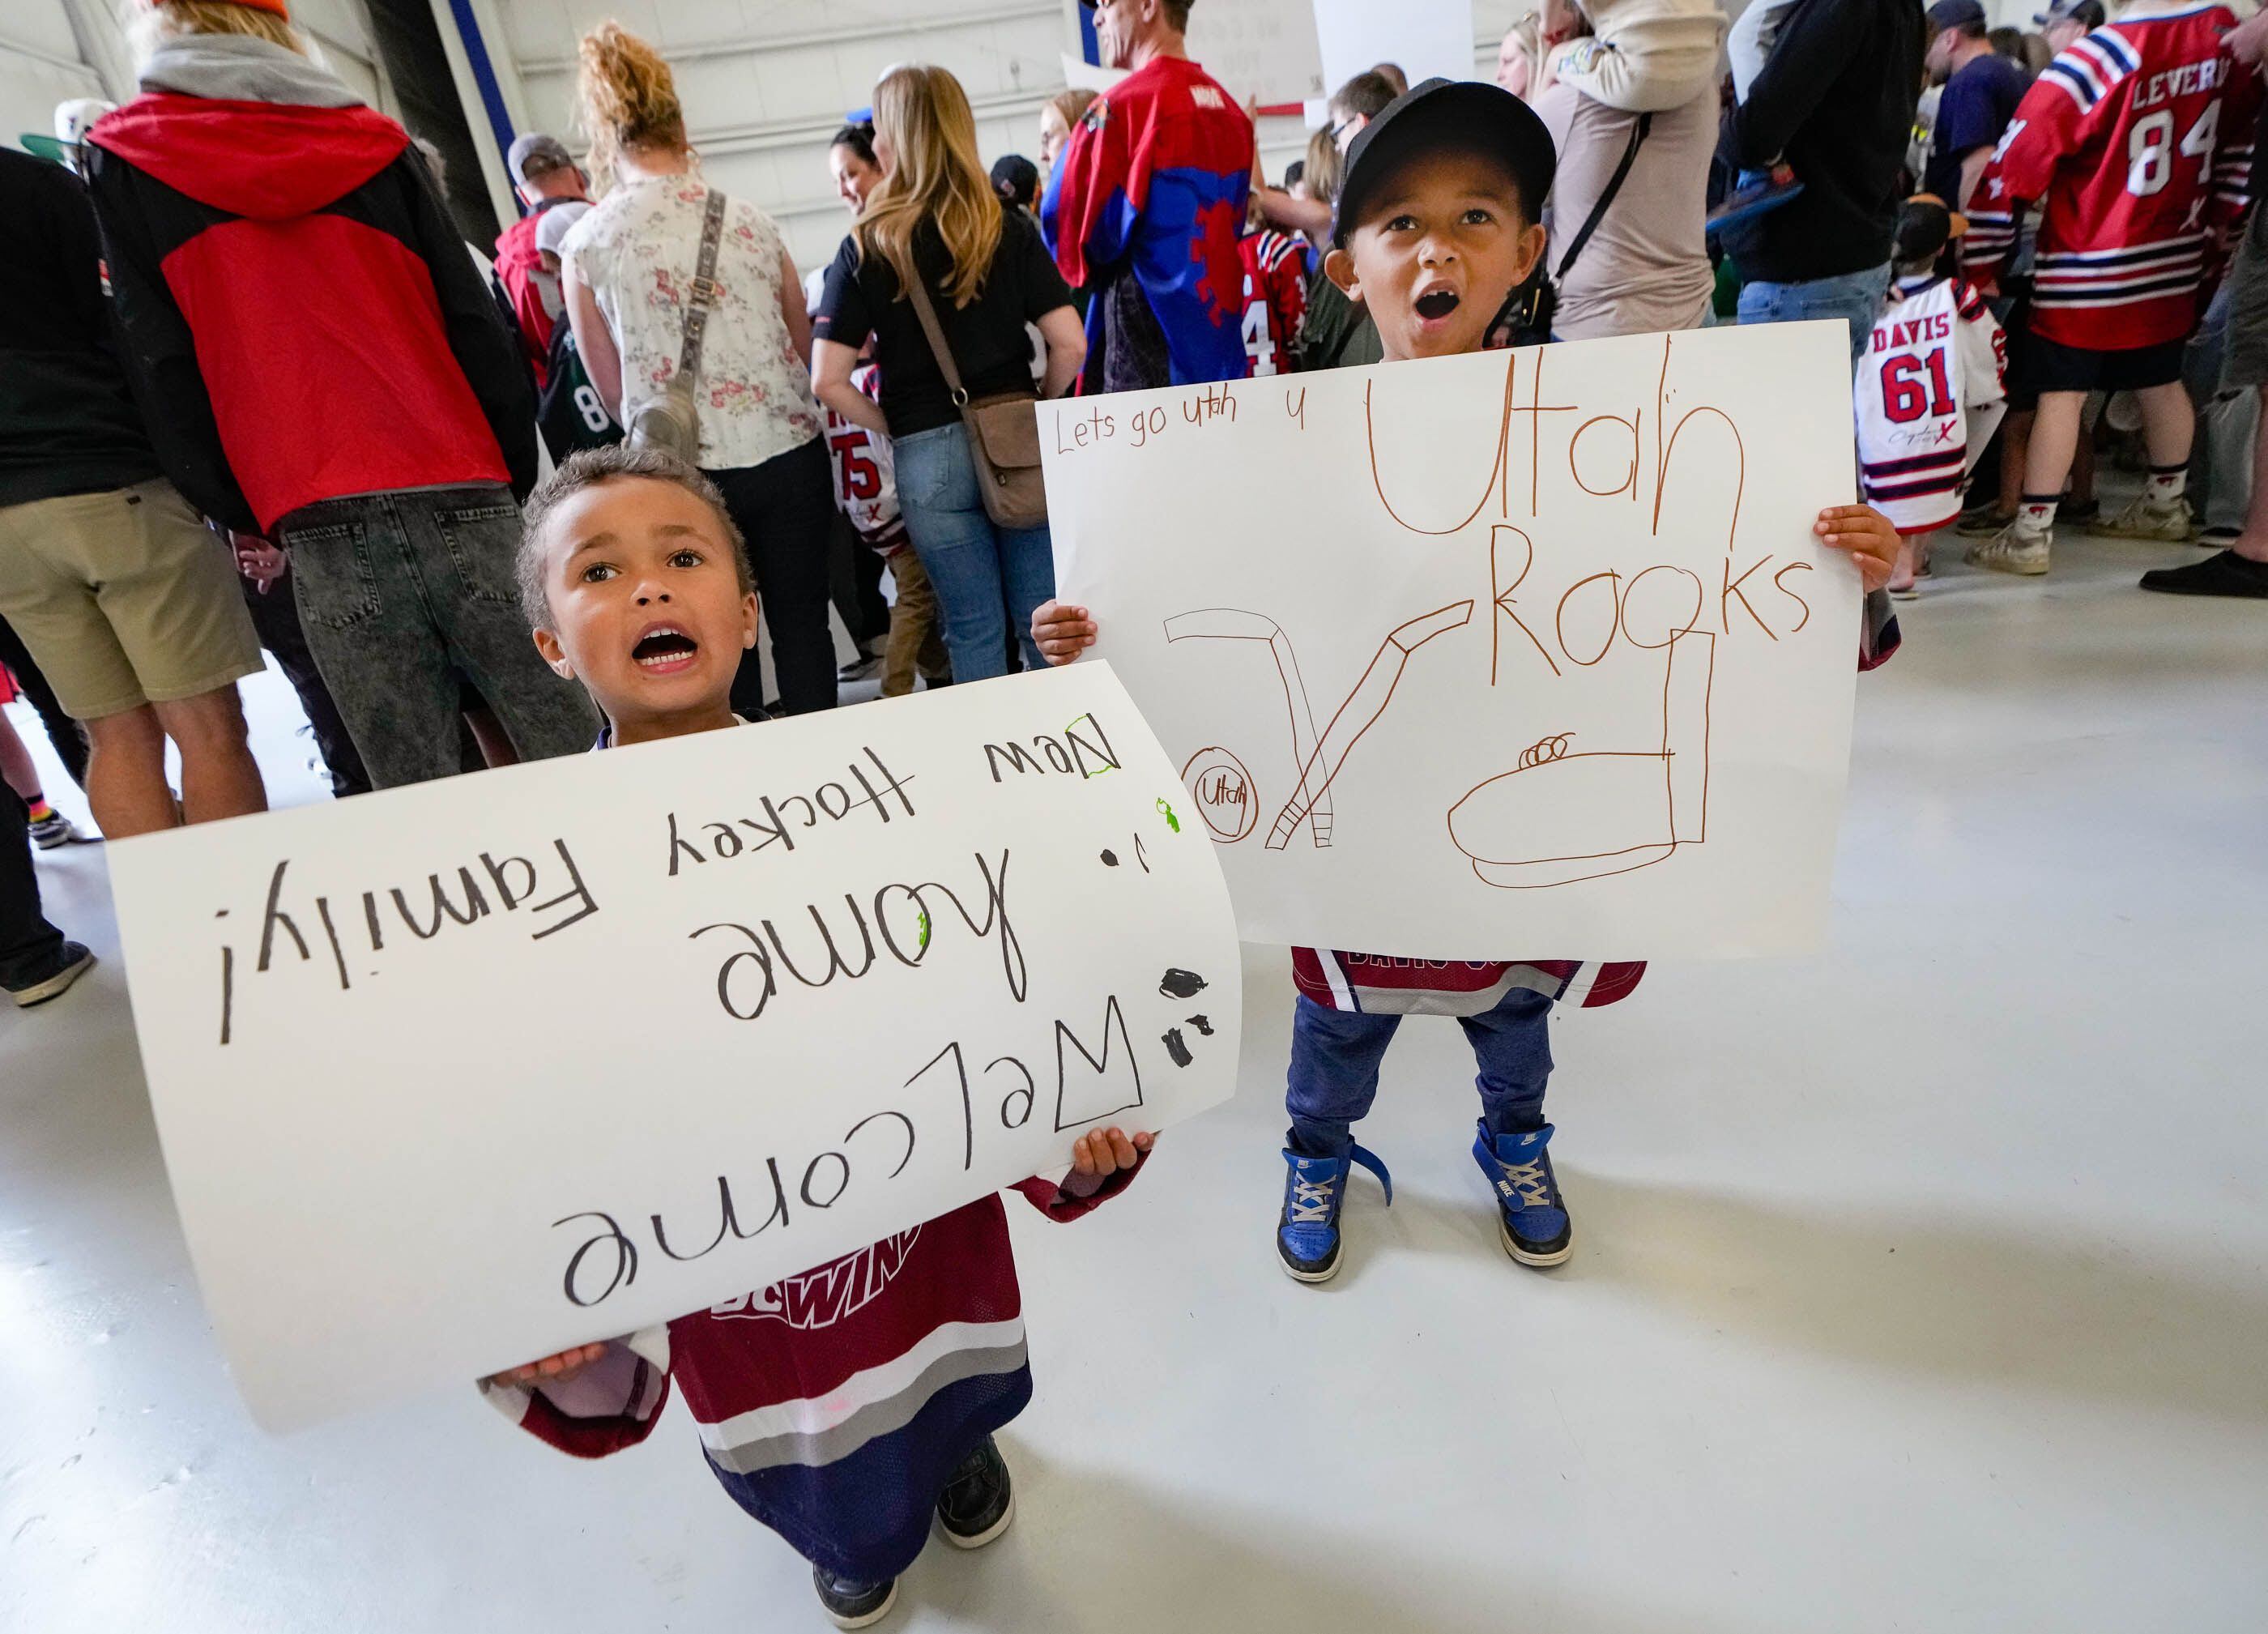 (Francisco Kjolseth  |  The Salt Lake Tribune) Young hockey fans Jordan Mortensen, 4, and his brother Nixon proudly display their posters as they wait for the arrival of the new NHL team at the airport in Salt Lake City on Wednesday, April 24, 2024.